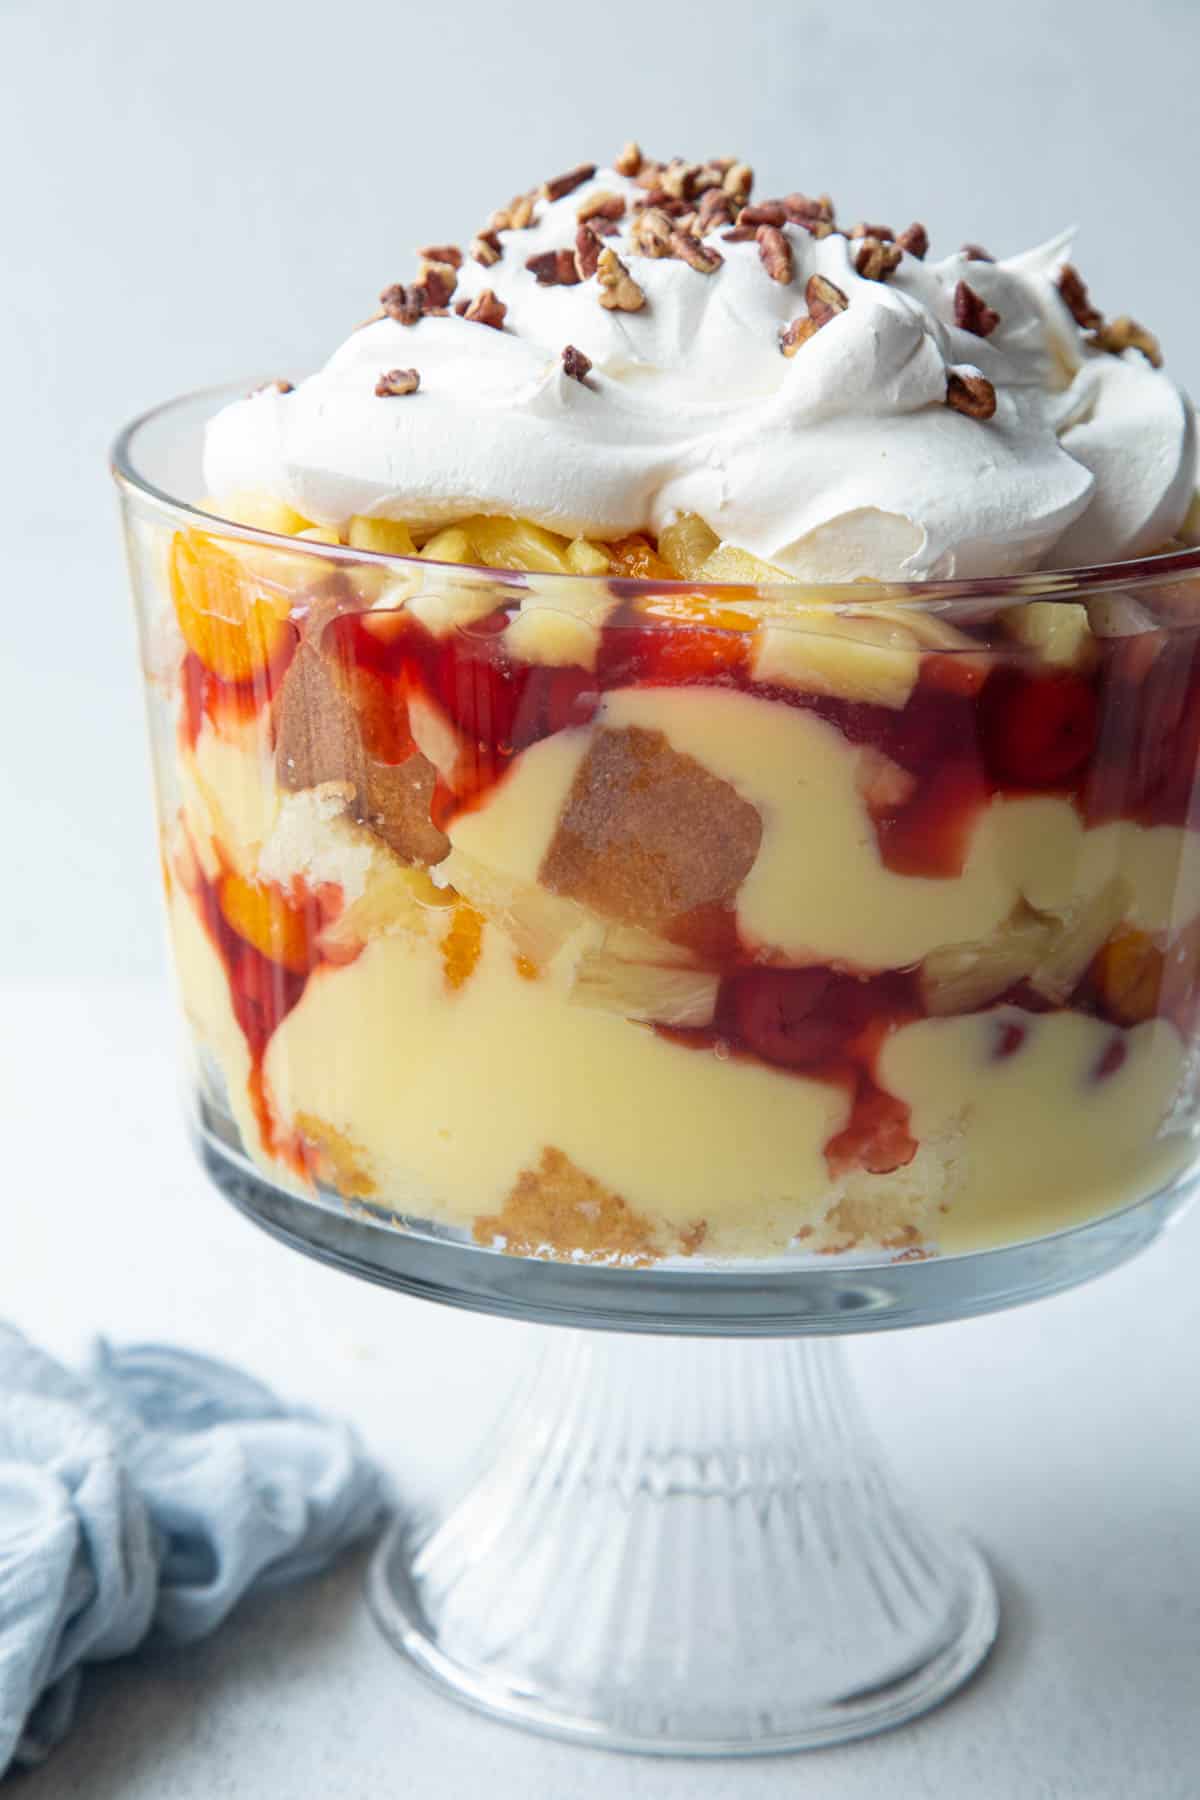 punch bowl cake assembled in a trifle dish with cake, pudding, pie filling, fruit, and whipped cream.